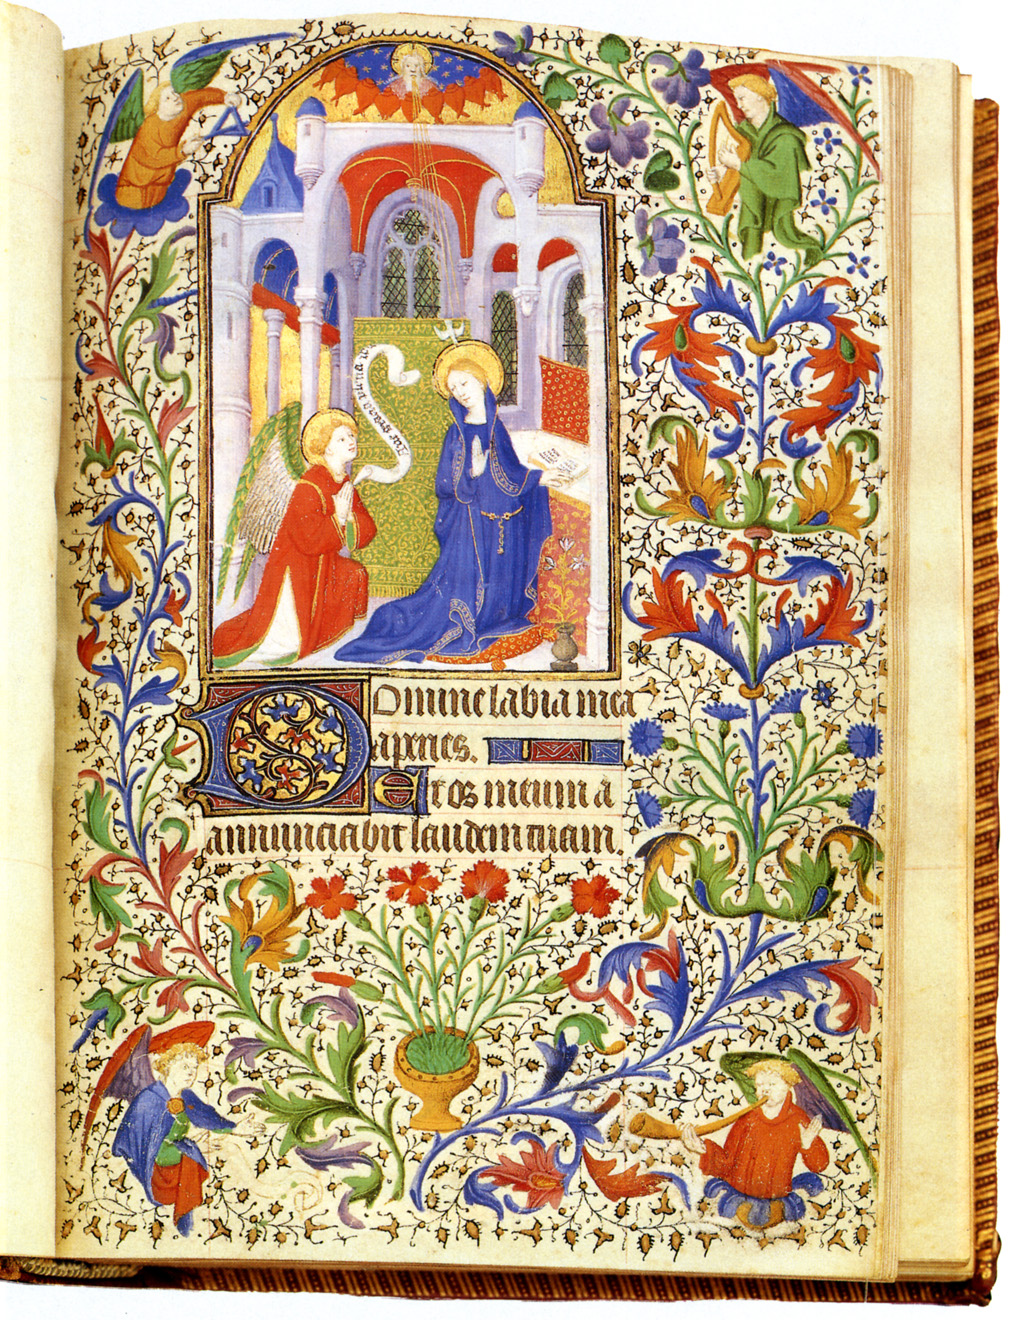 A miniature of the Annunciation from a French Book of Hours showing very elaborate manuscript illumination.